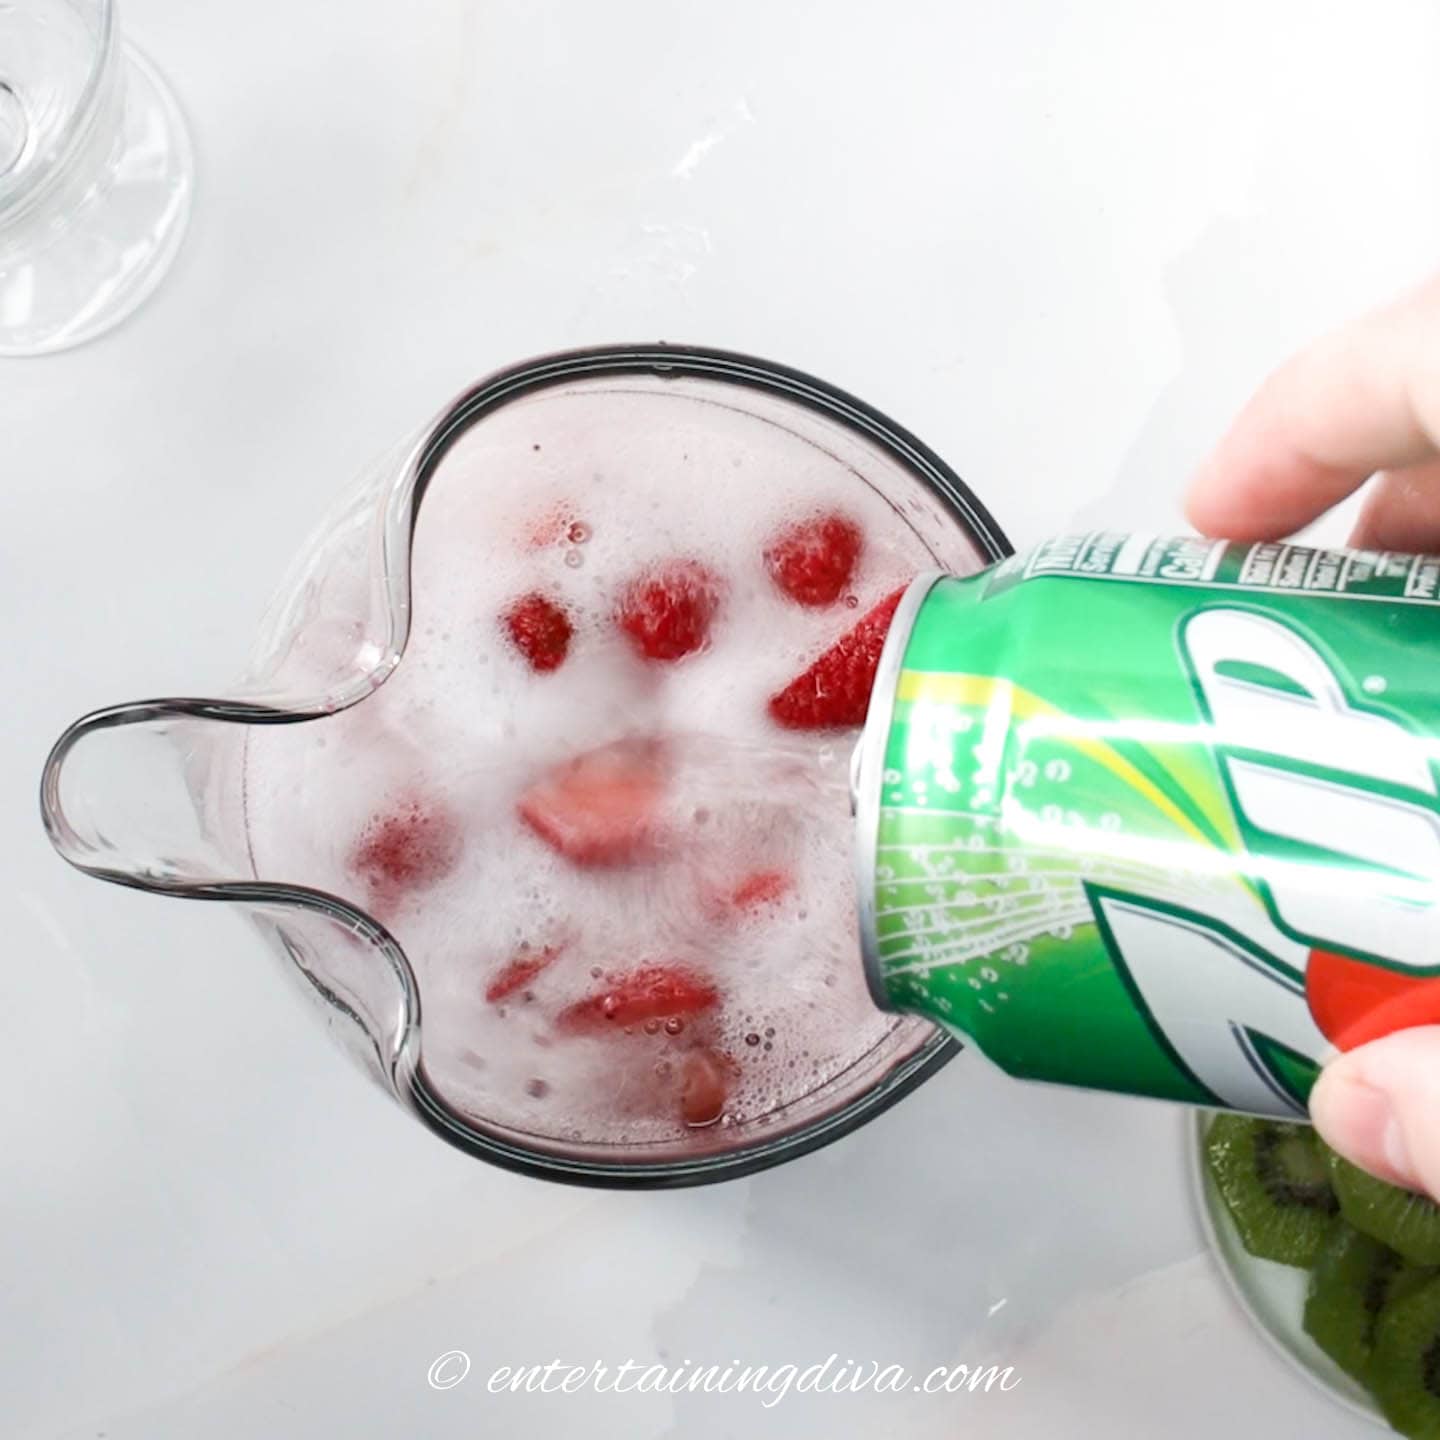 7-Up being poured into a pitcher of Sangria